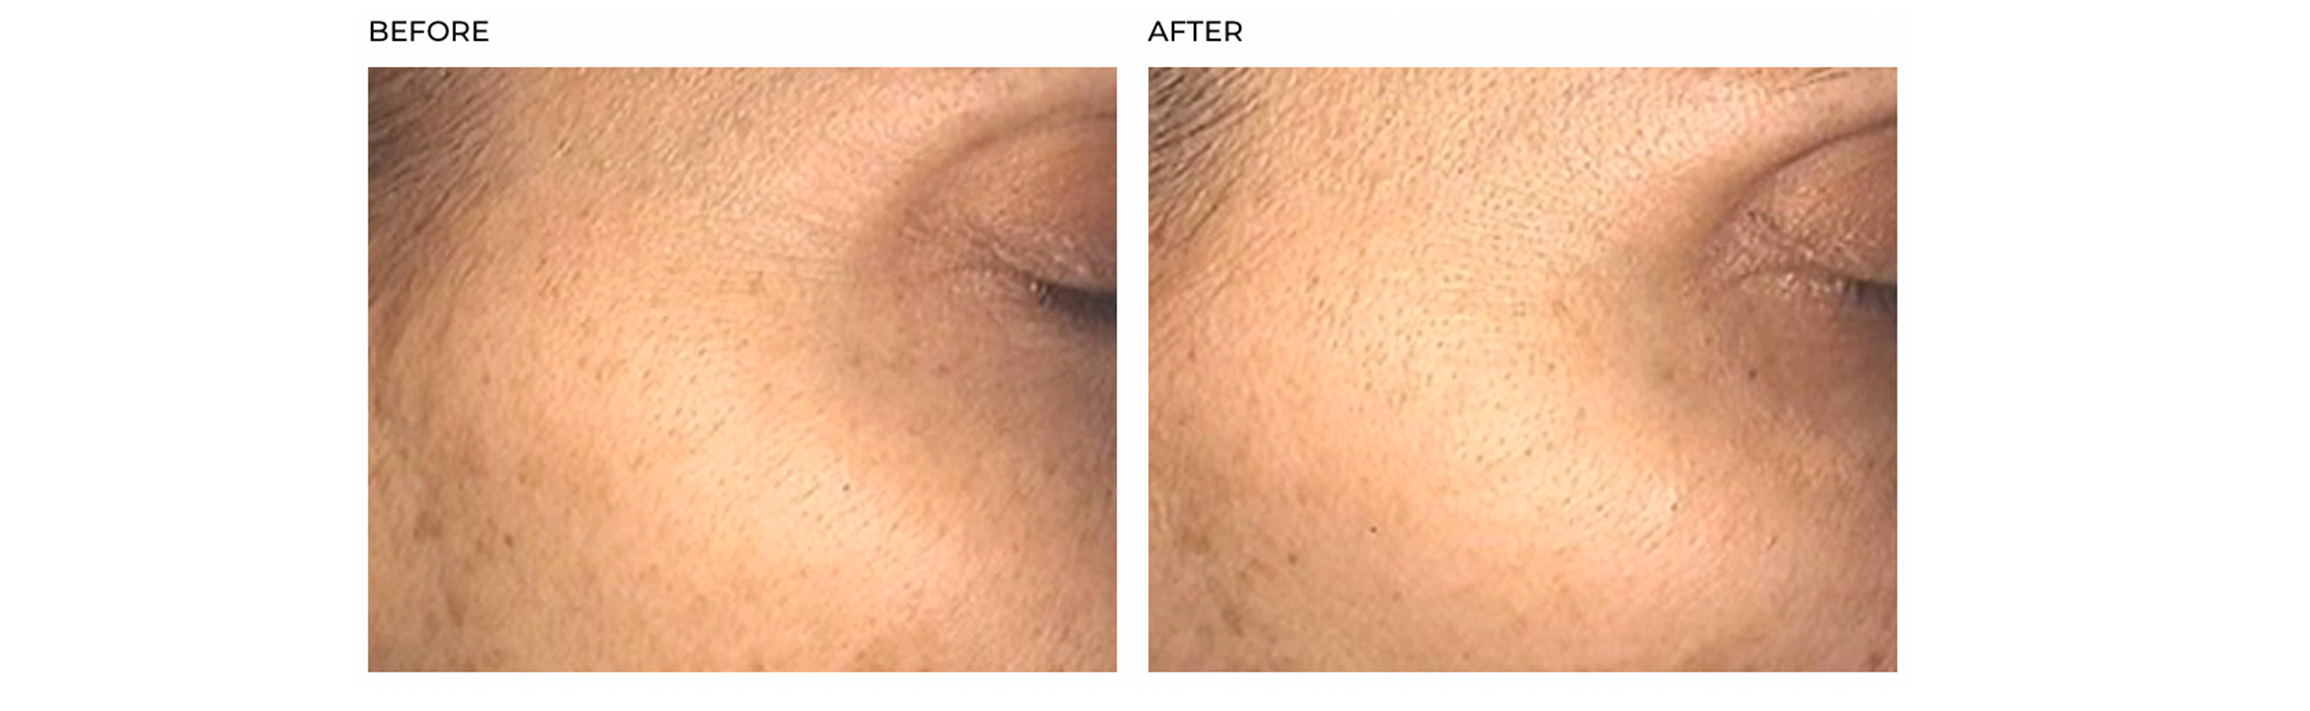 Hush & Hush SkinCapsule Brighten+ results before & after